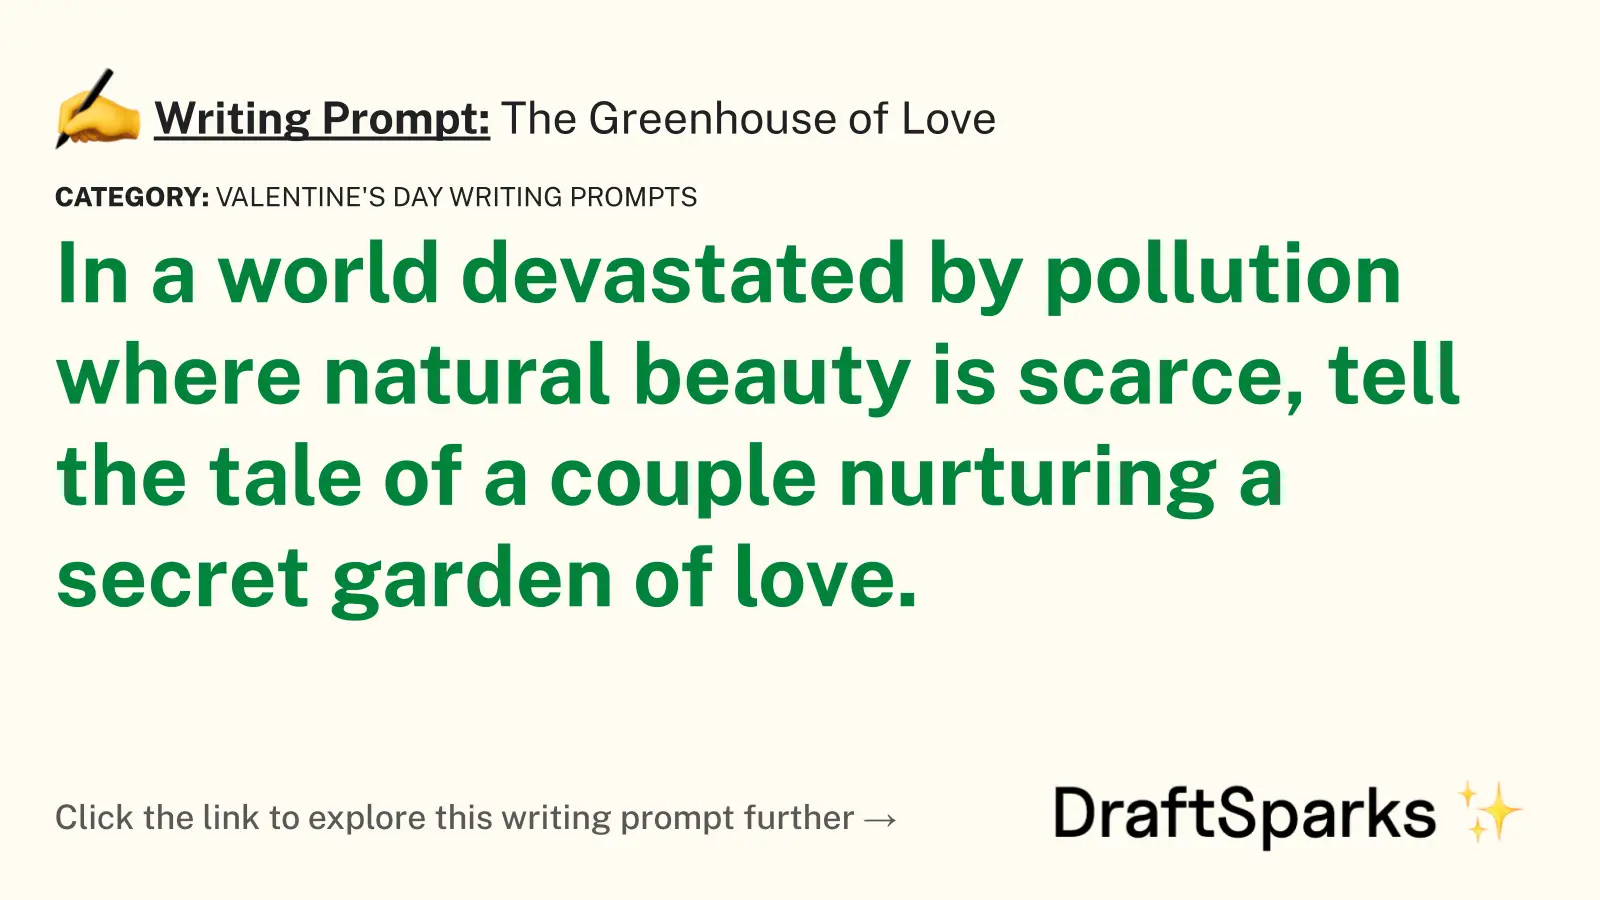 The Greenhouse of Love